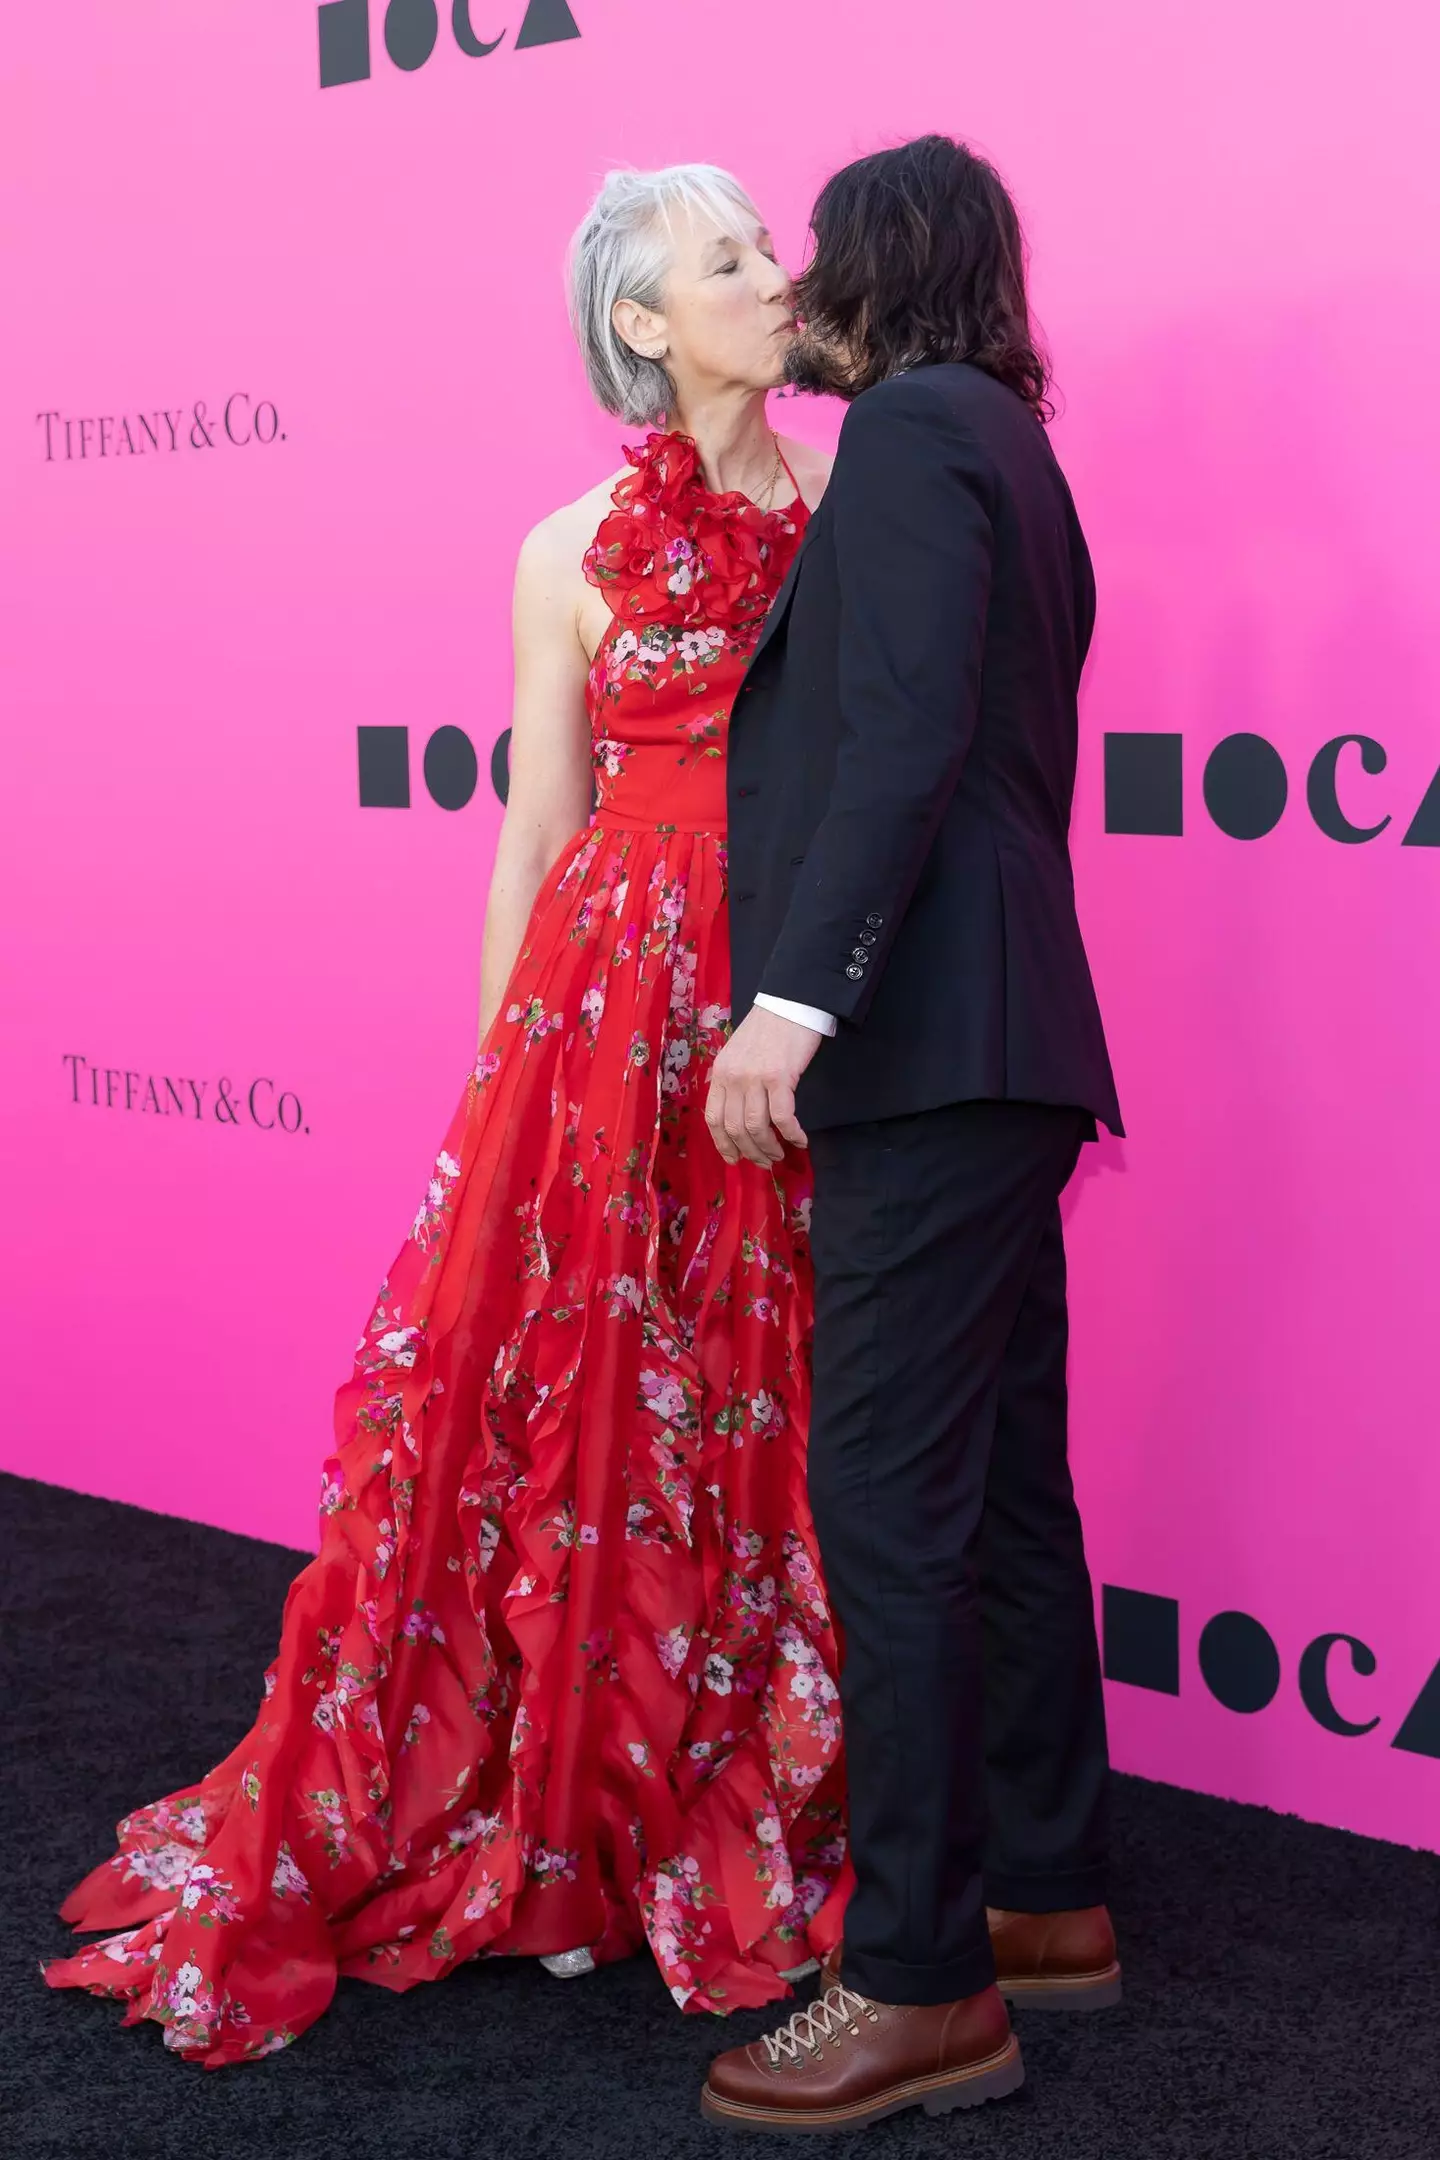 Keanu Reeves and Alexandra Grant shared a kiss on the red carpet.